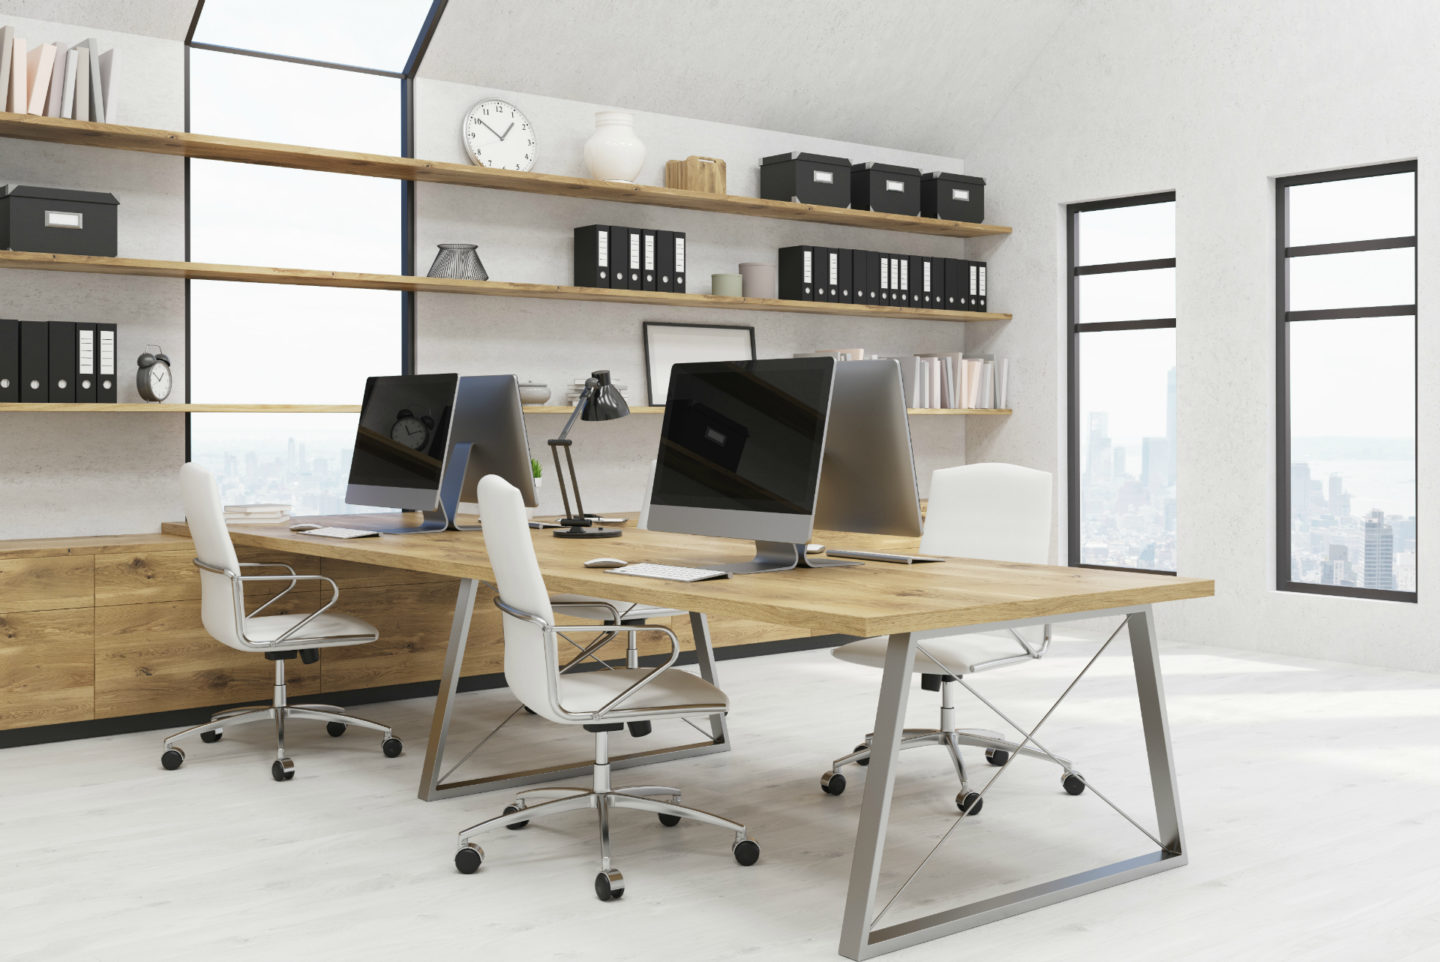 The pros and cons of hot-desking